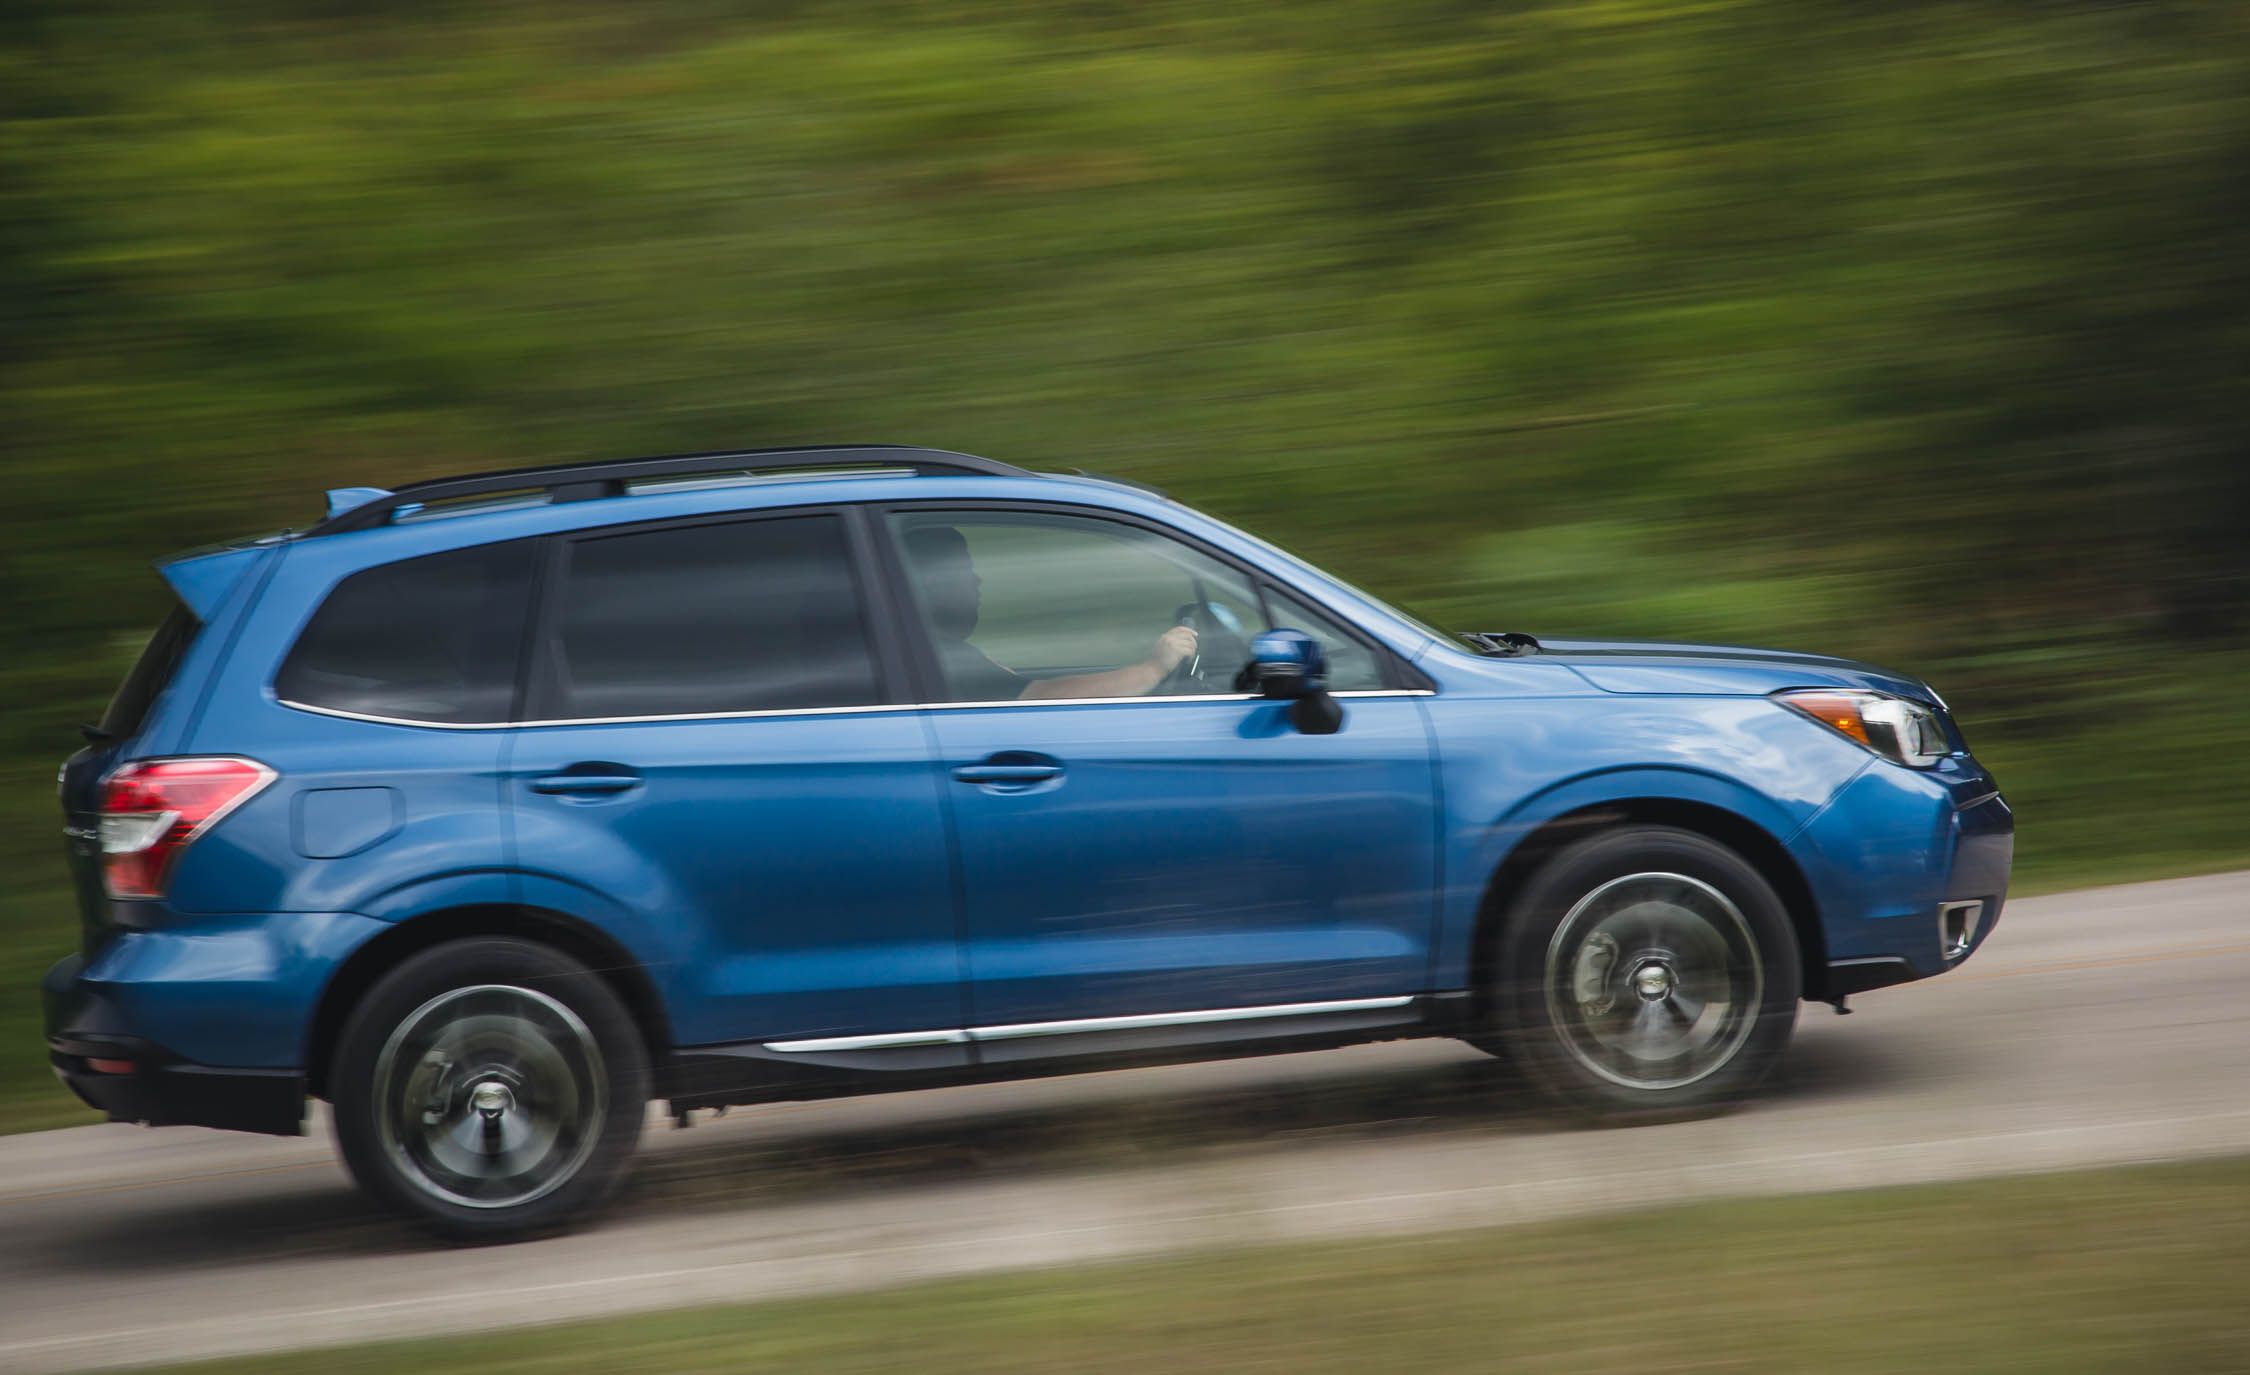 2016 Subaru Forester 2 0xt Touring Test Side View (View 20 of 29)